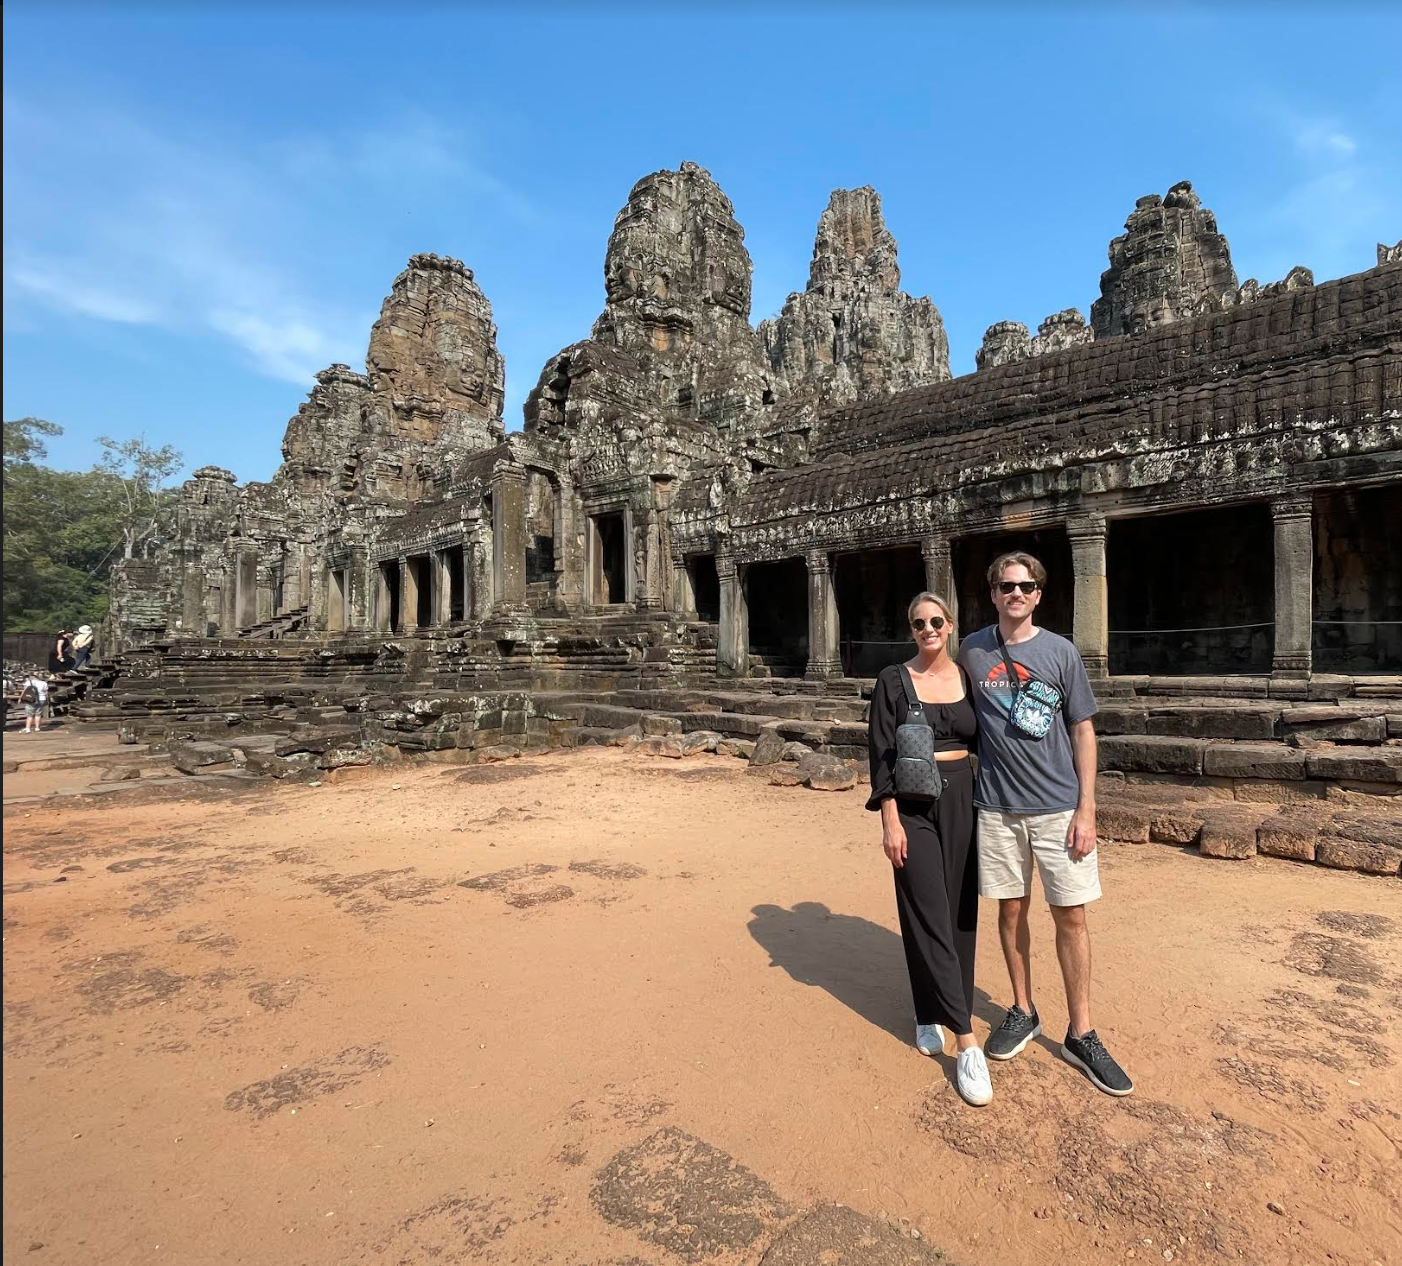 what's the best time for visiting angkor wat, cambodia?